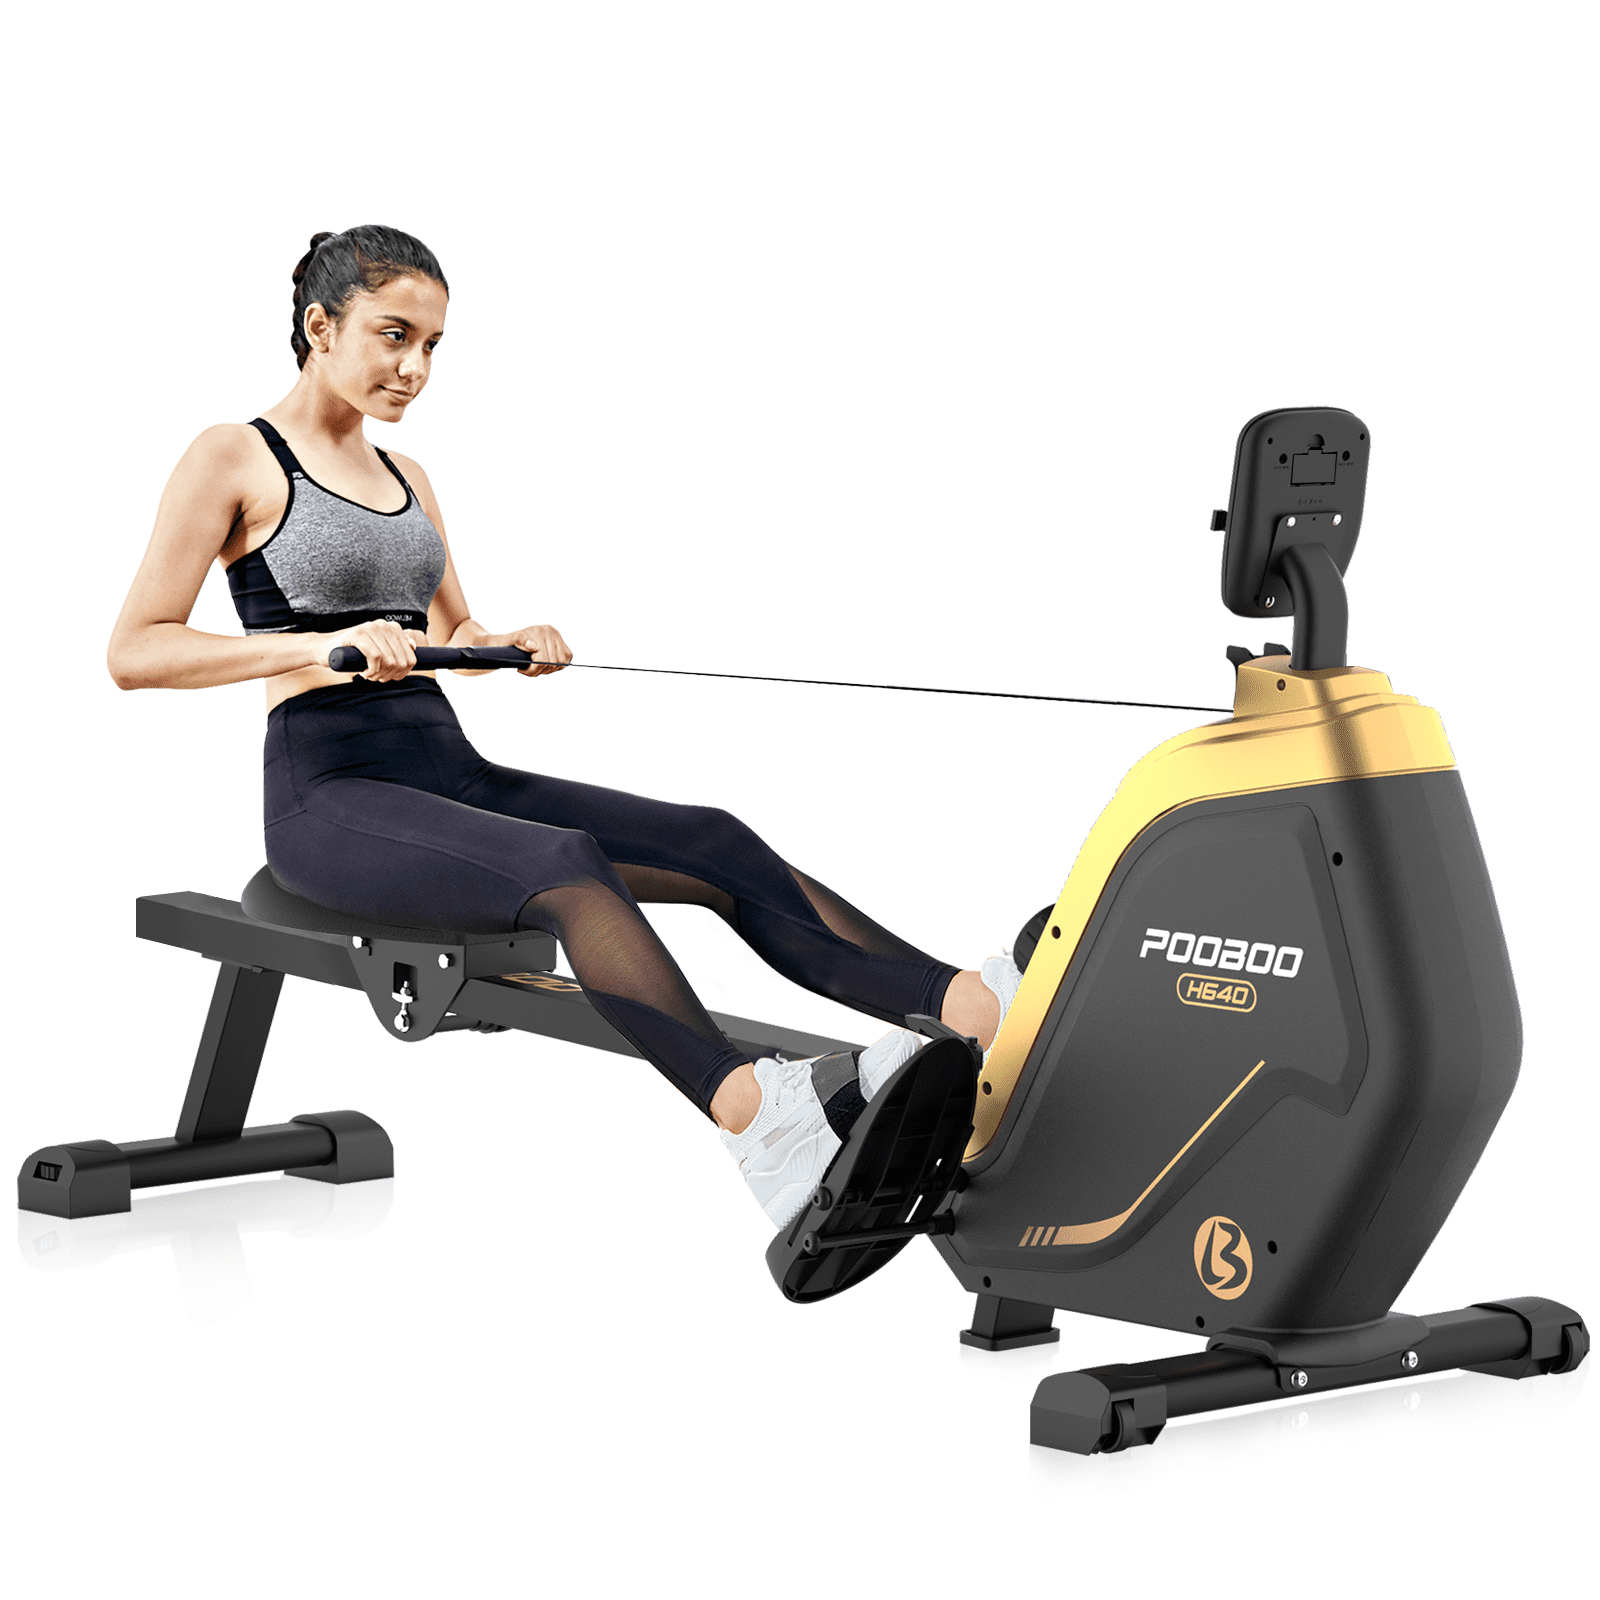 3-position height Rowing Machine Folding Resistance Cardio Fitness Toning Rower 